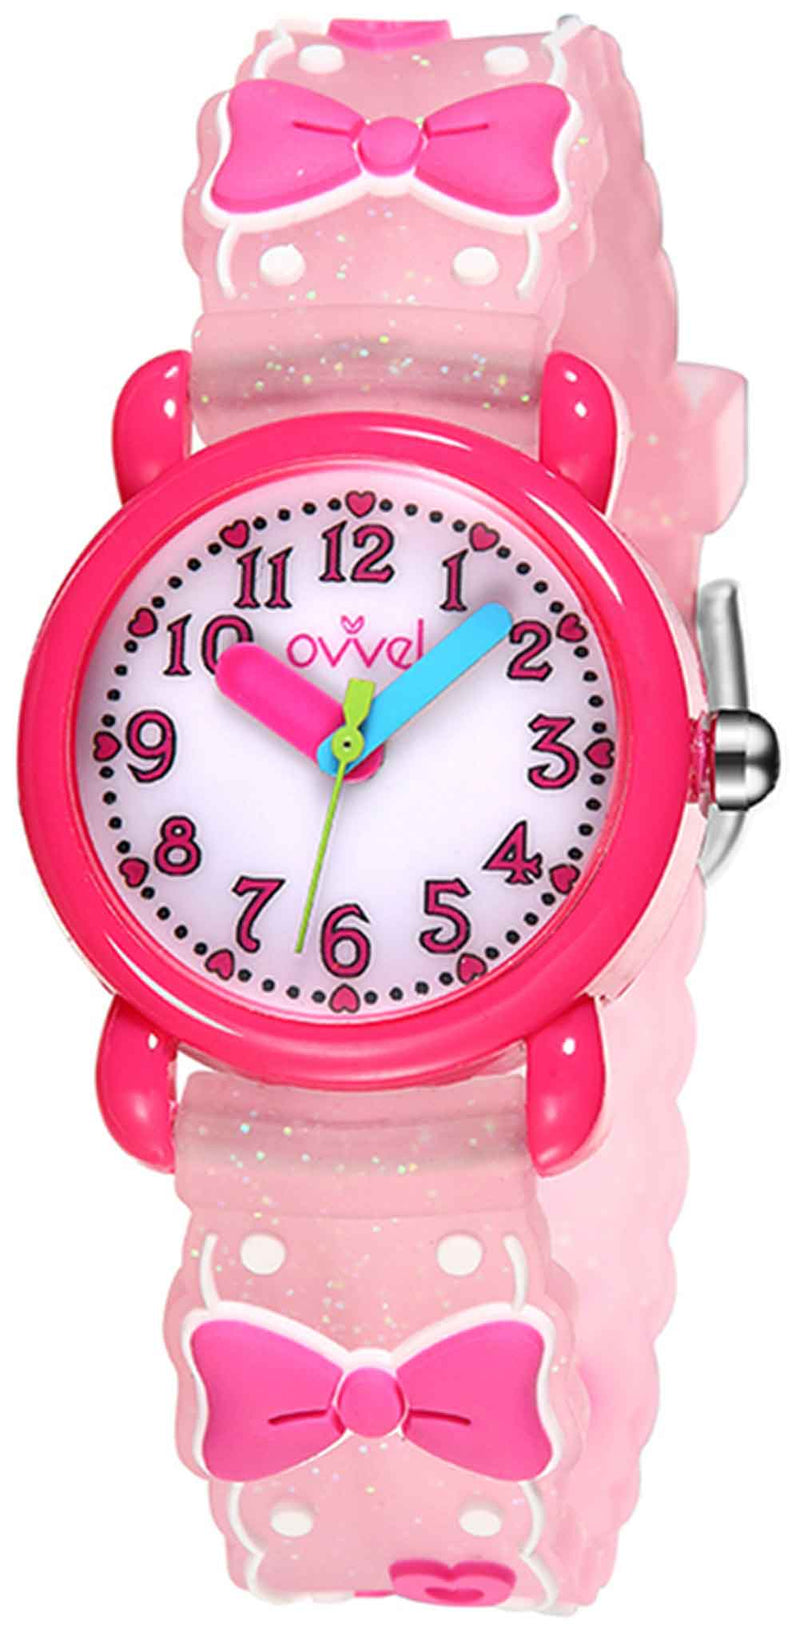 Watches for kids - Hot Pink Bows